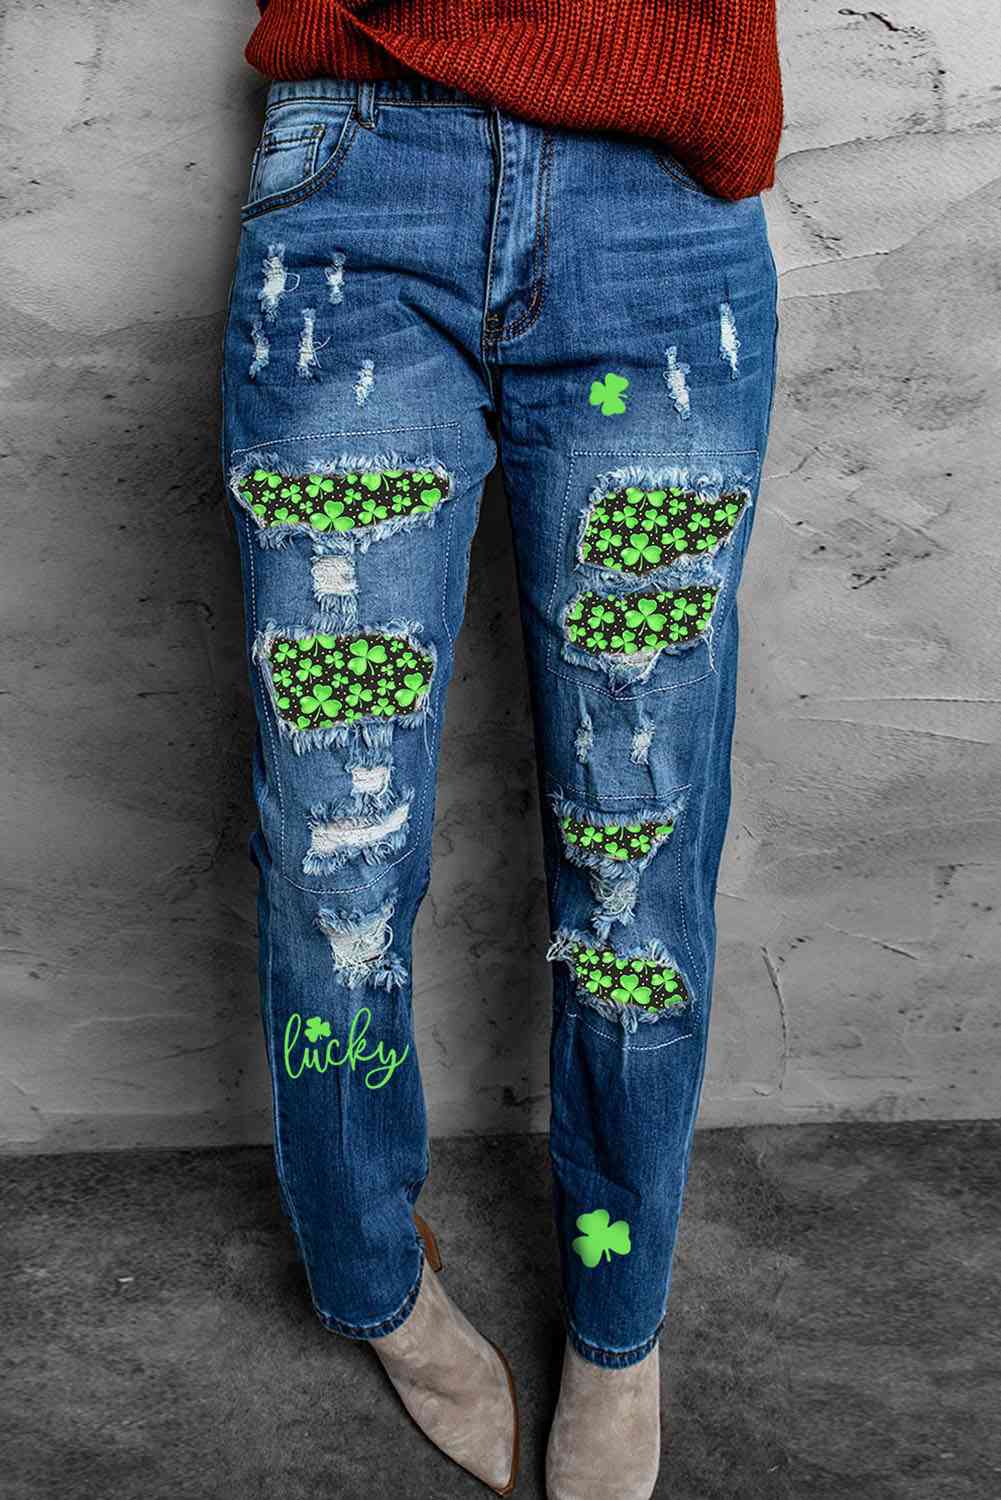 Baeful Printed Patch Distressed Boyfriend Jeans Light/Green